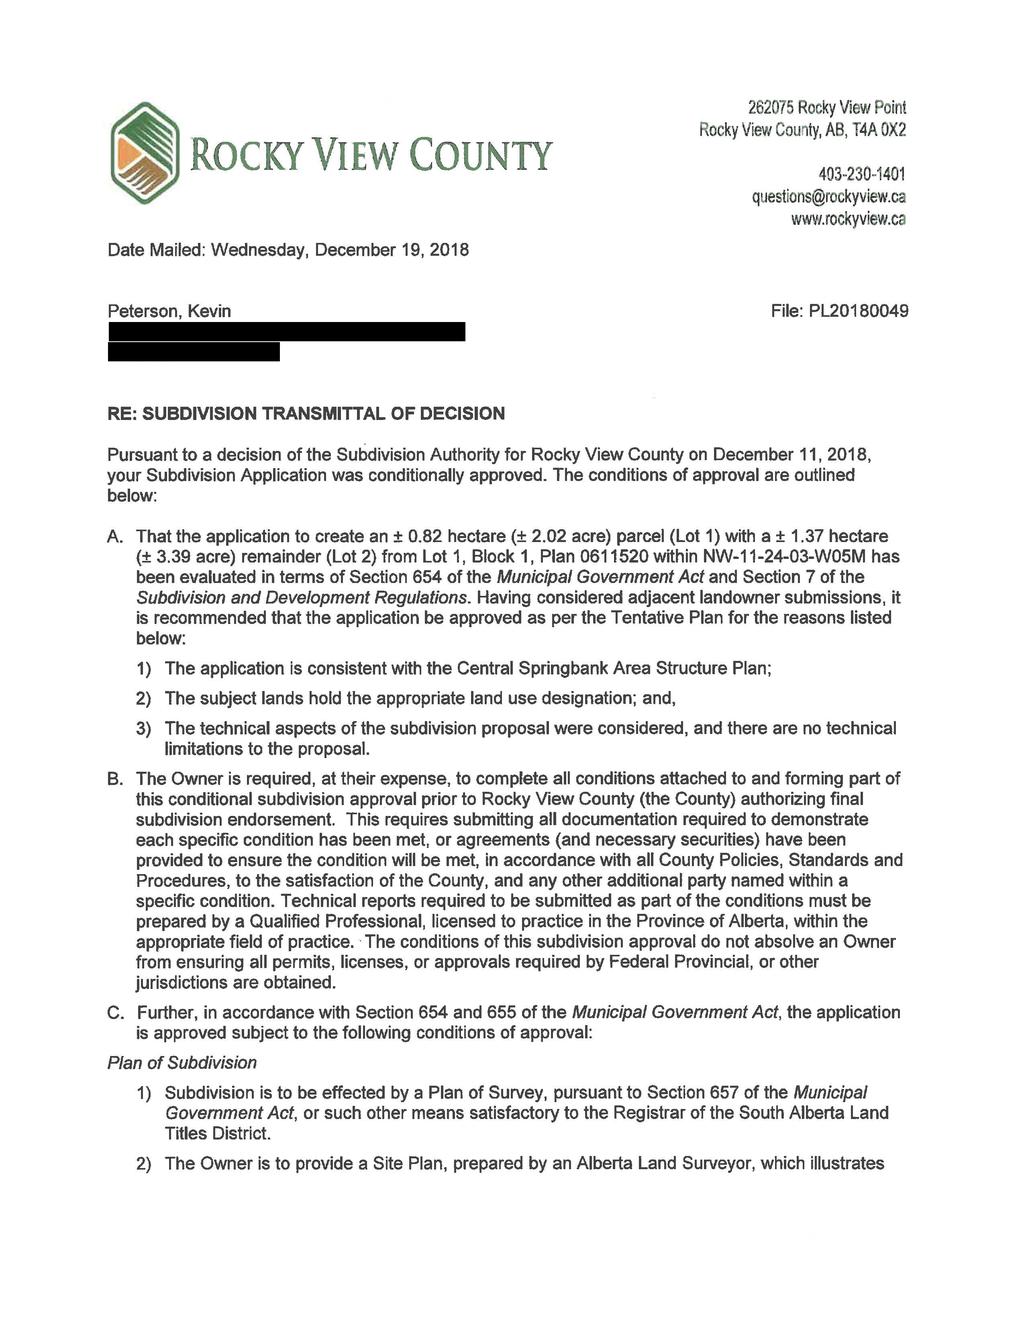 B-2 Page 21 of 51 APPENDIX 'B': Transmittal of Decision 262075 Rocky View Point Rocky View County, AB, T4A OX2 ROCKY VIEW COUNTY 403-230-1401 questions@rockyview.